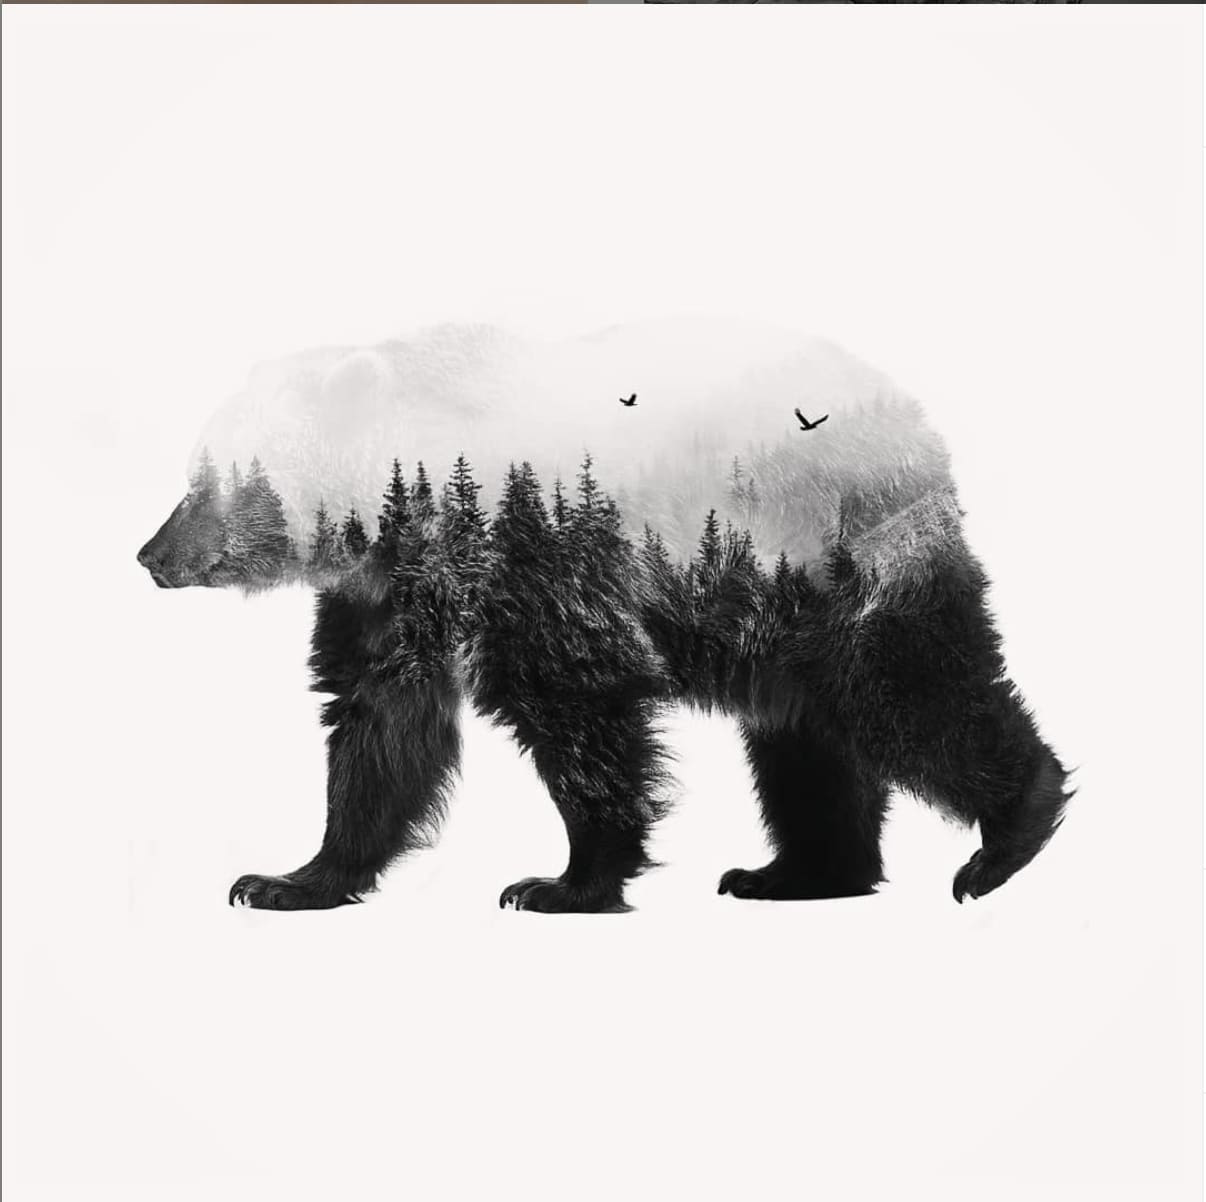 double exposure efix ours montain photomontage